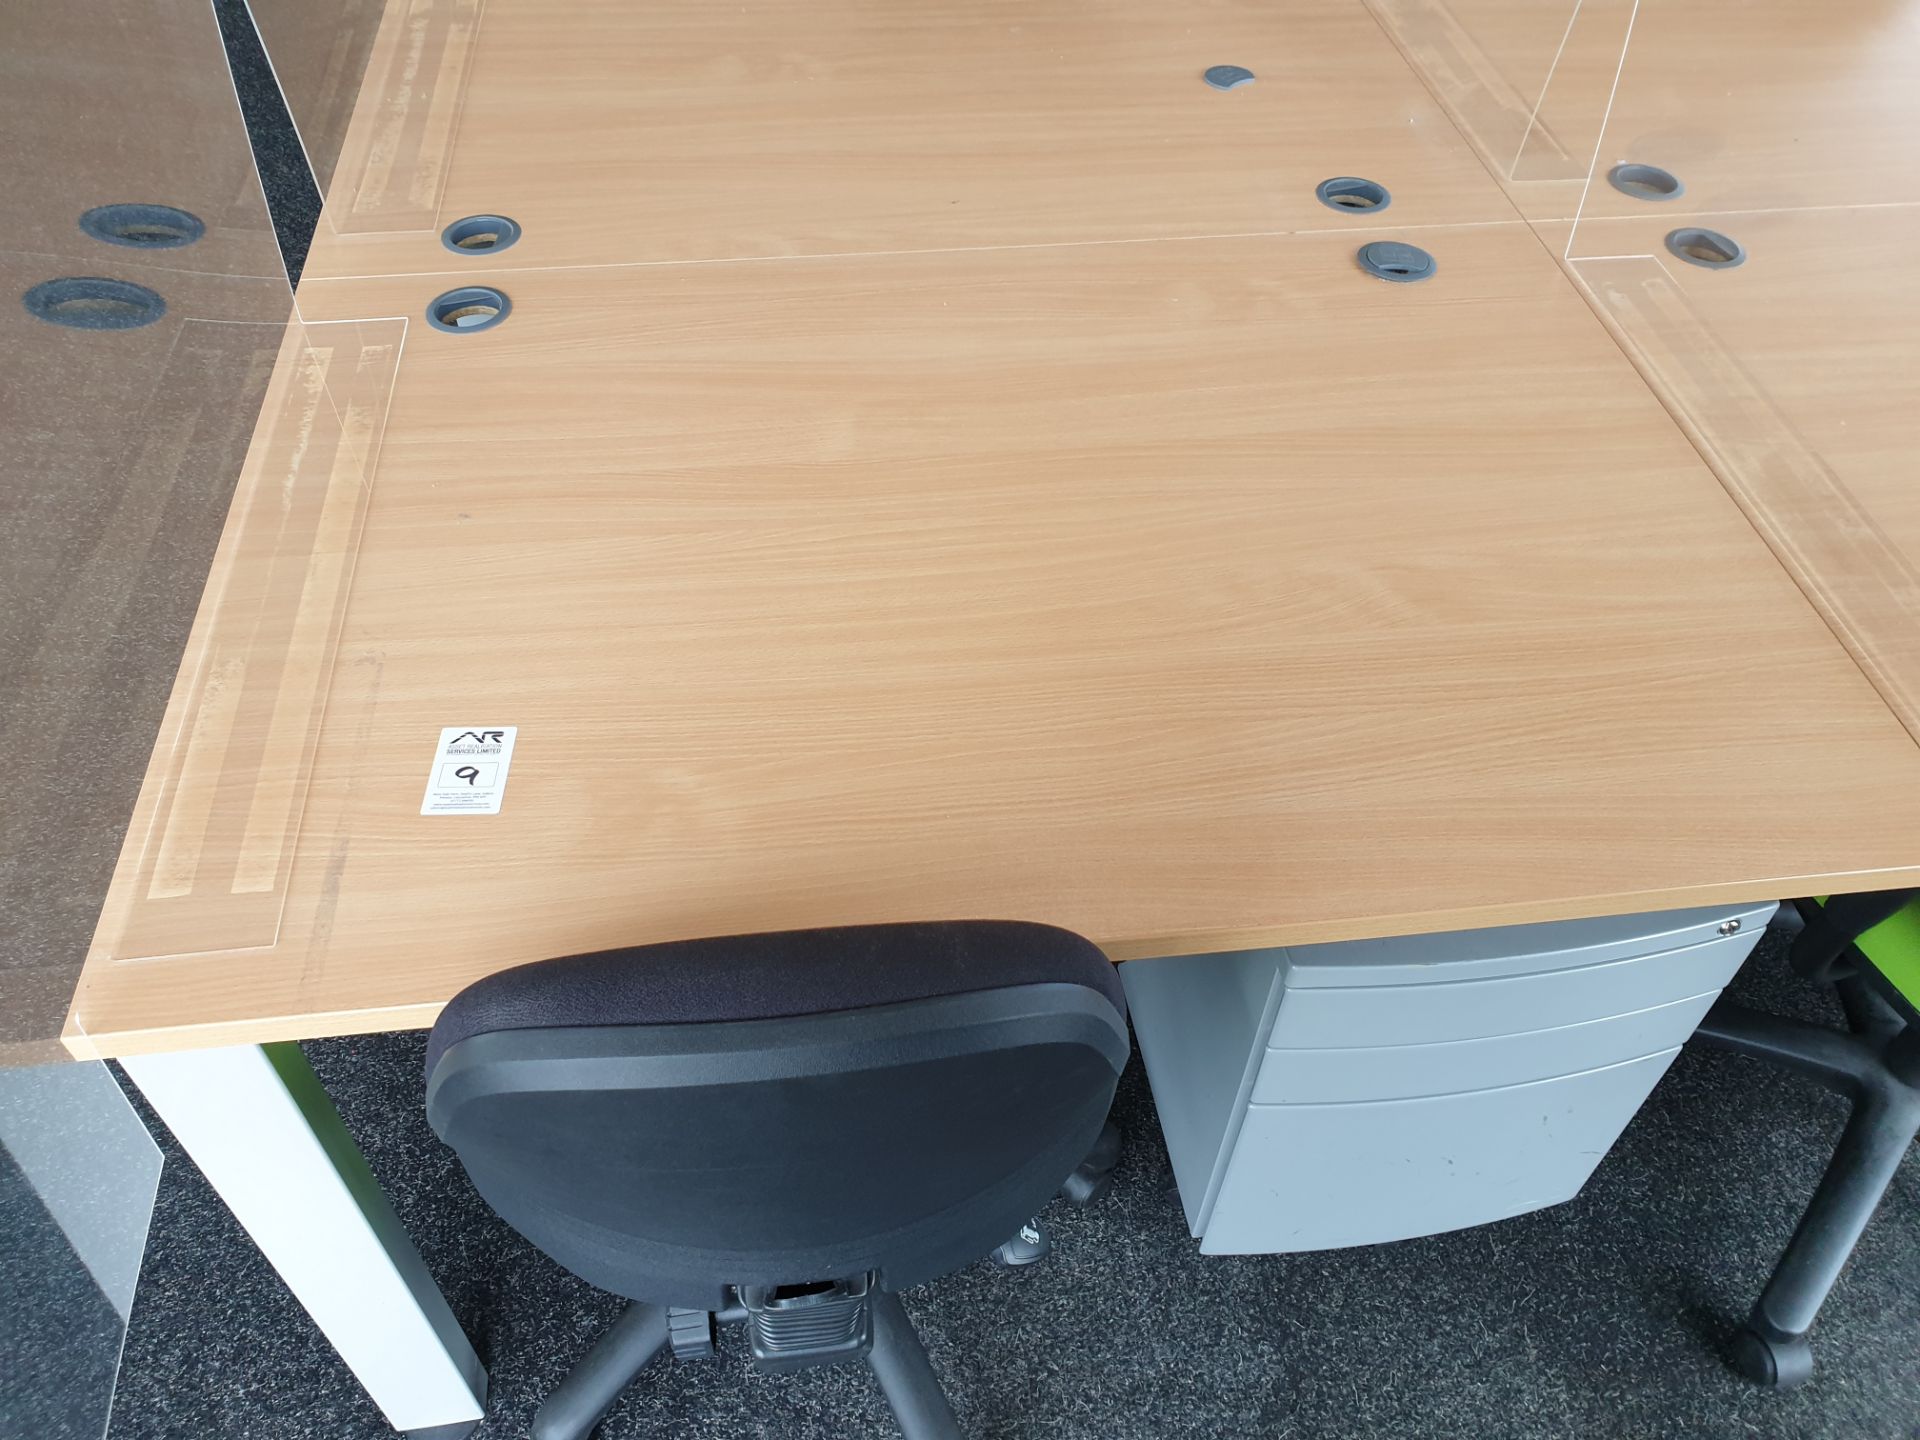 10 Person Workstation / Desks with covid screens - Image 2 of 4